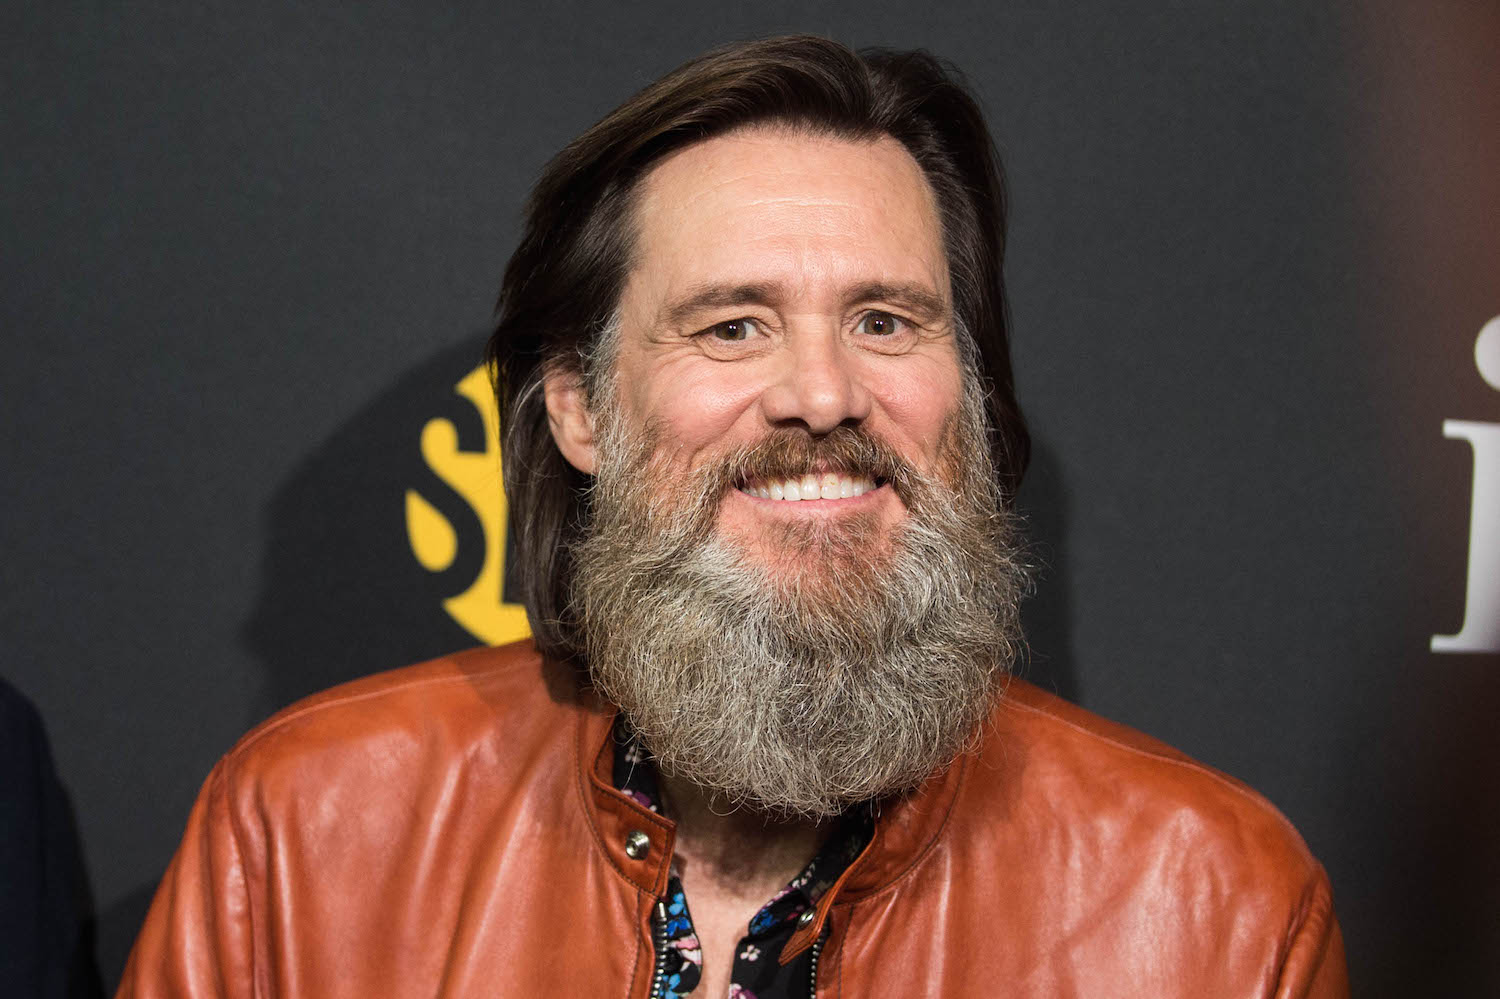 Jim Carrey Wiki, Bio, Age, Net Worth, and Other Facts